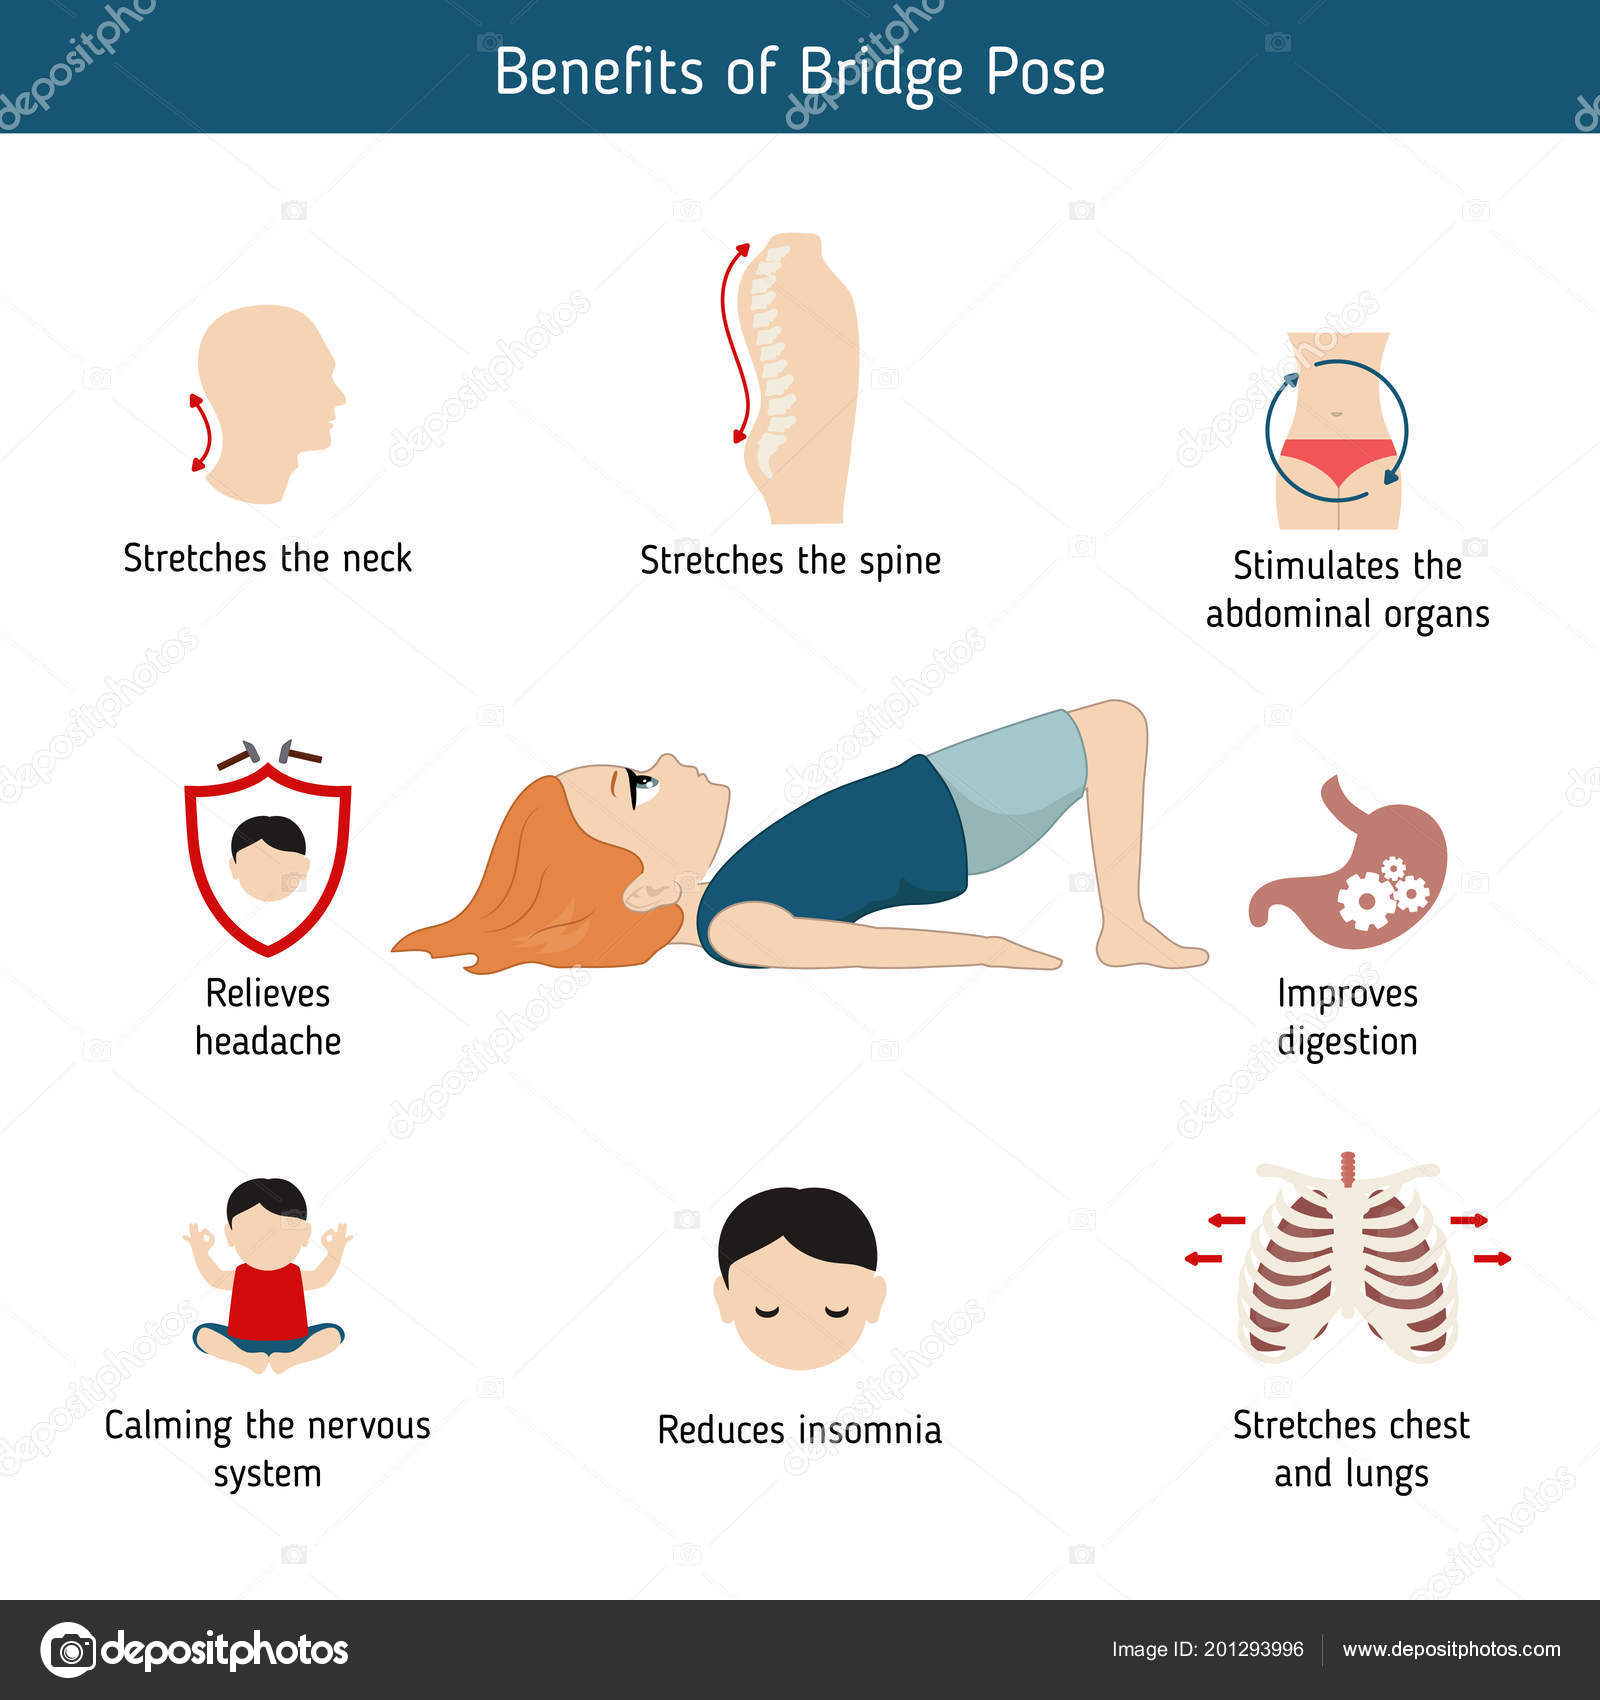 Yogalogy - Bridge pose is one of the important supine yoga poses which is  helpful in the treatment of thyroid, back pain, neck pain, problems related  to the nervous system, and many